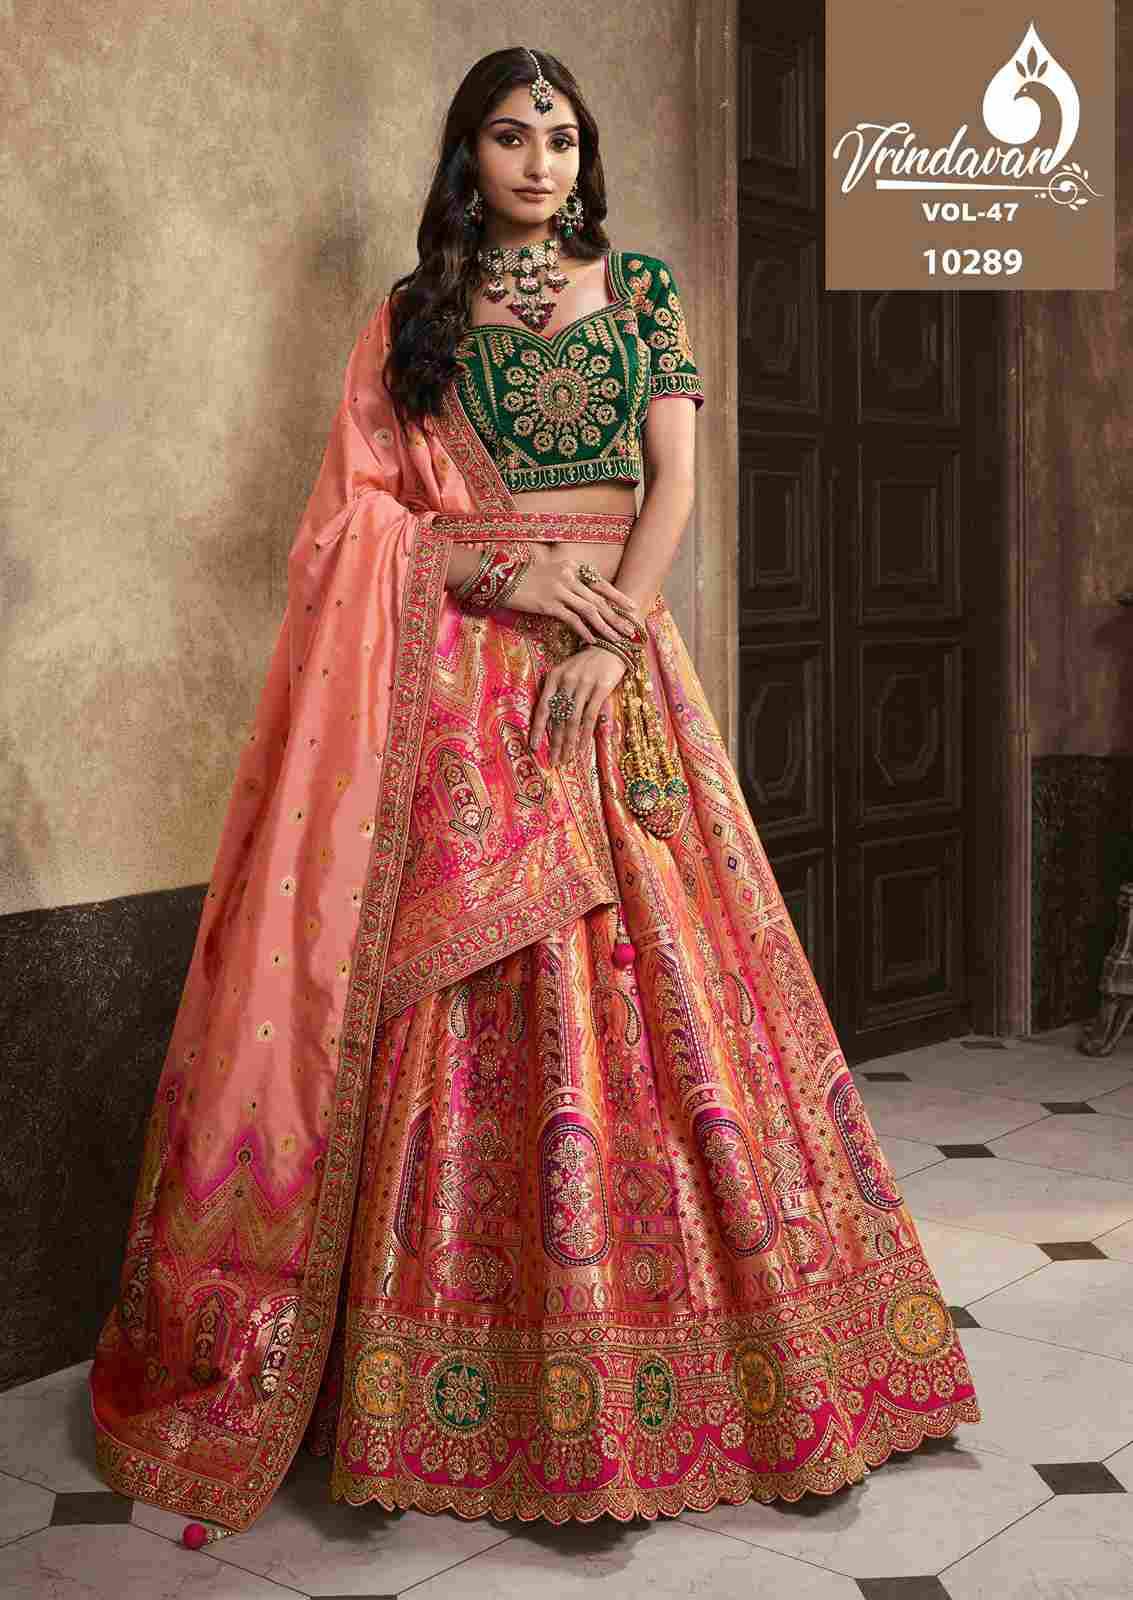 Vrindavan Vol-47 By Vrindavan 10281 To 10289 Series Designer Beautiful Wedding Collection Occasional Wear & Party Wear Silk Lehengas At Wholesale Price